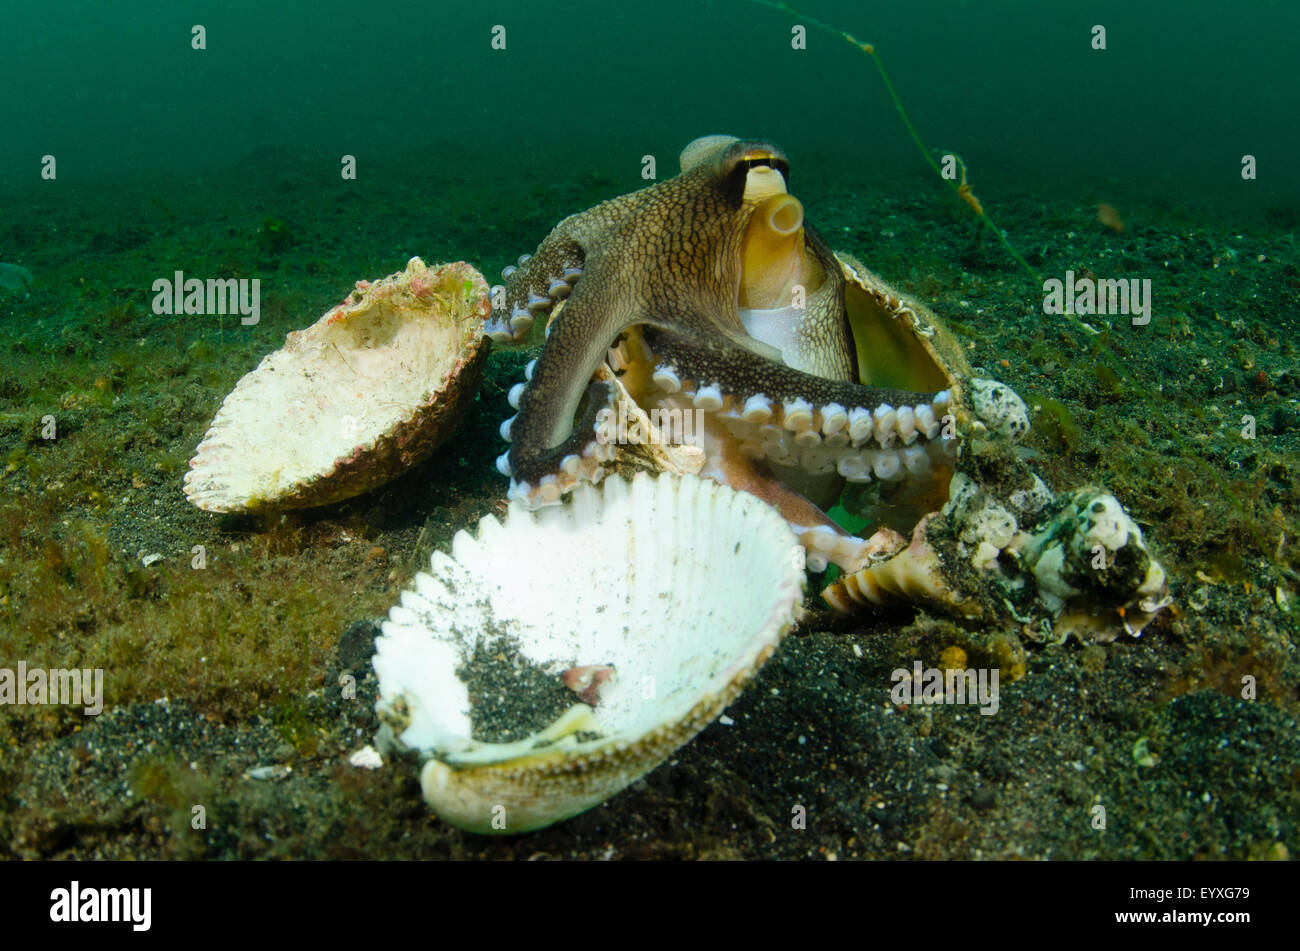 Coconut octopus and a collection of shells that it uses as a home, Amphioctopus marginatus, Lembeh Strait, North Sulawesi Stock Photo